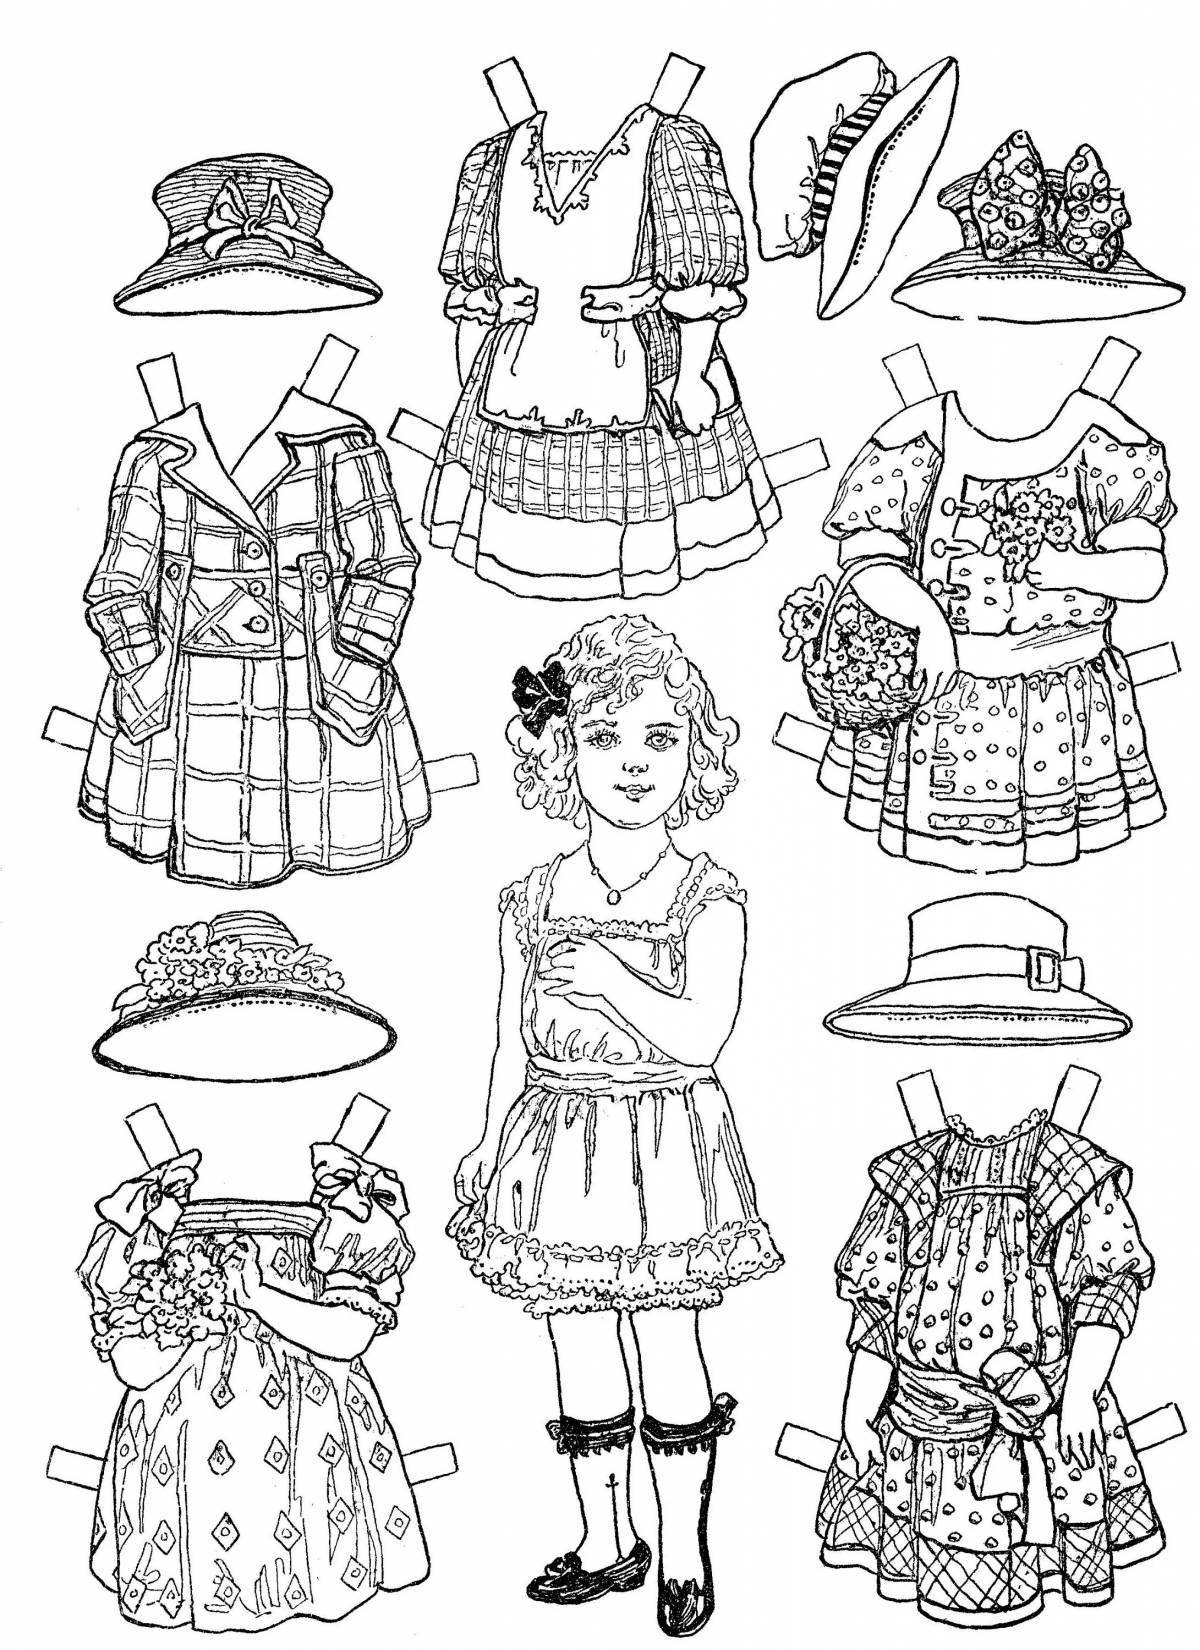 Adorable doll outfit coloring page